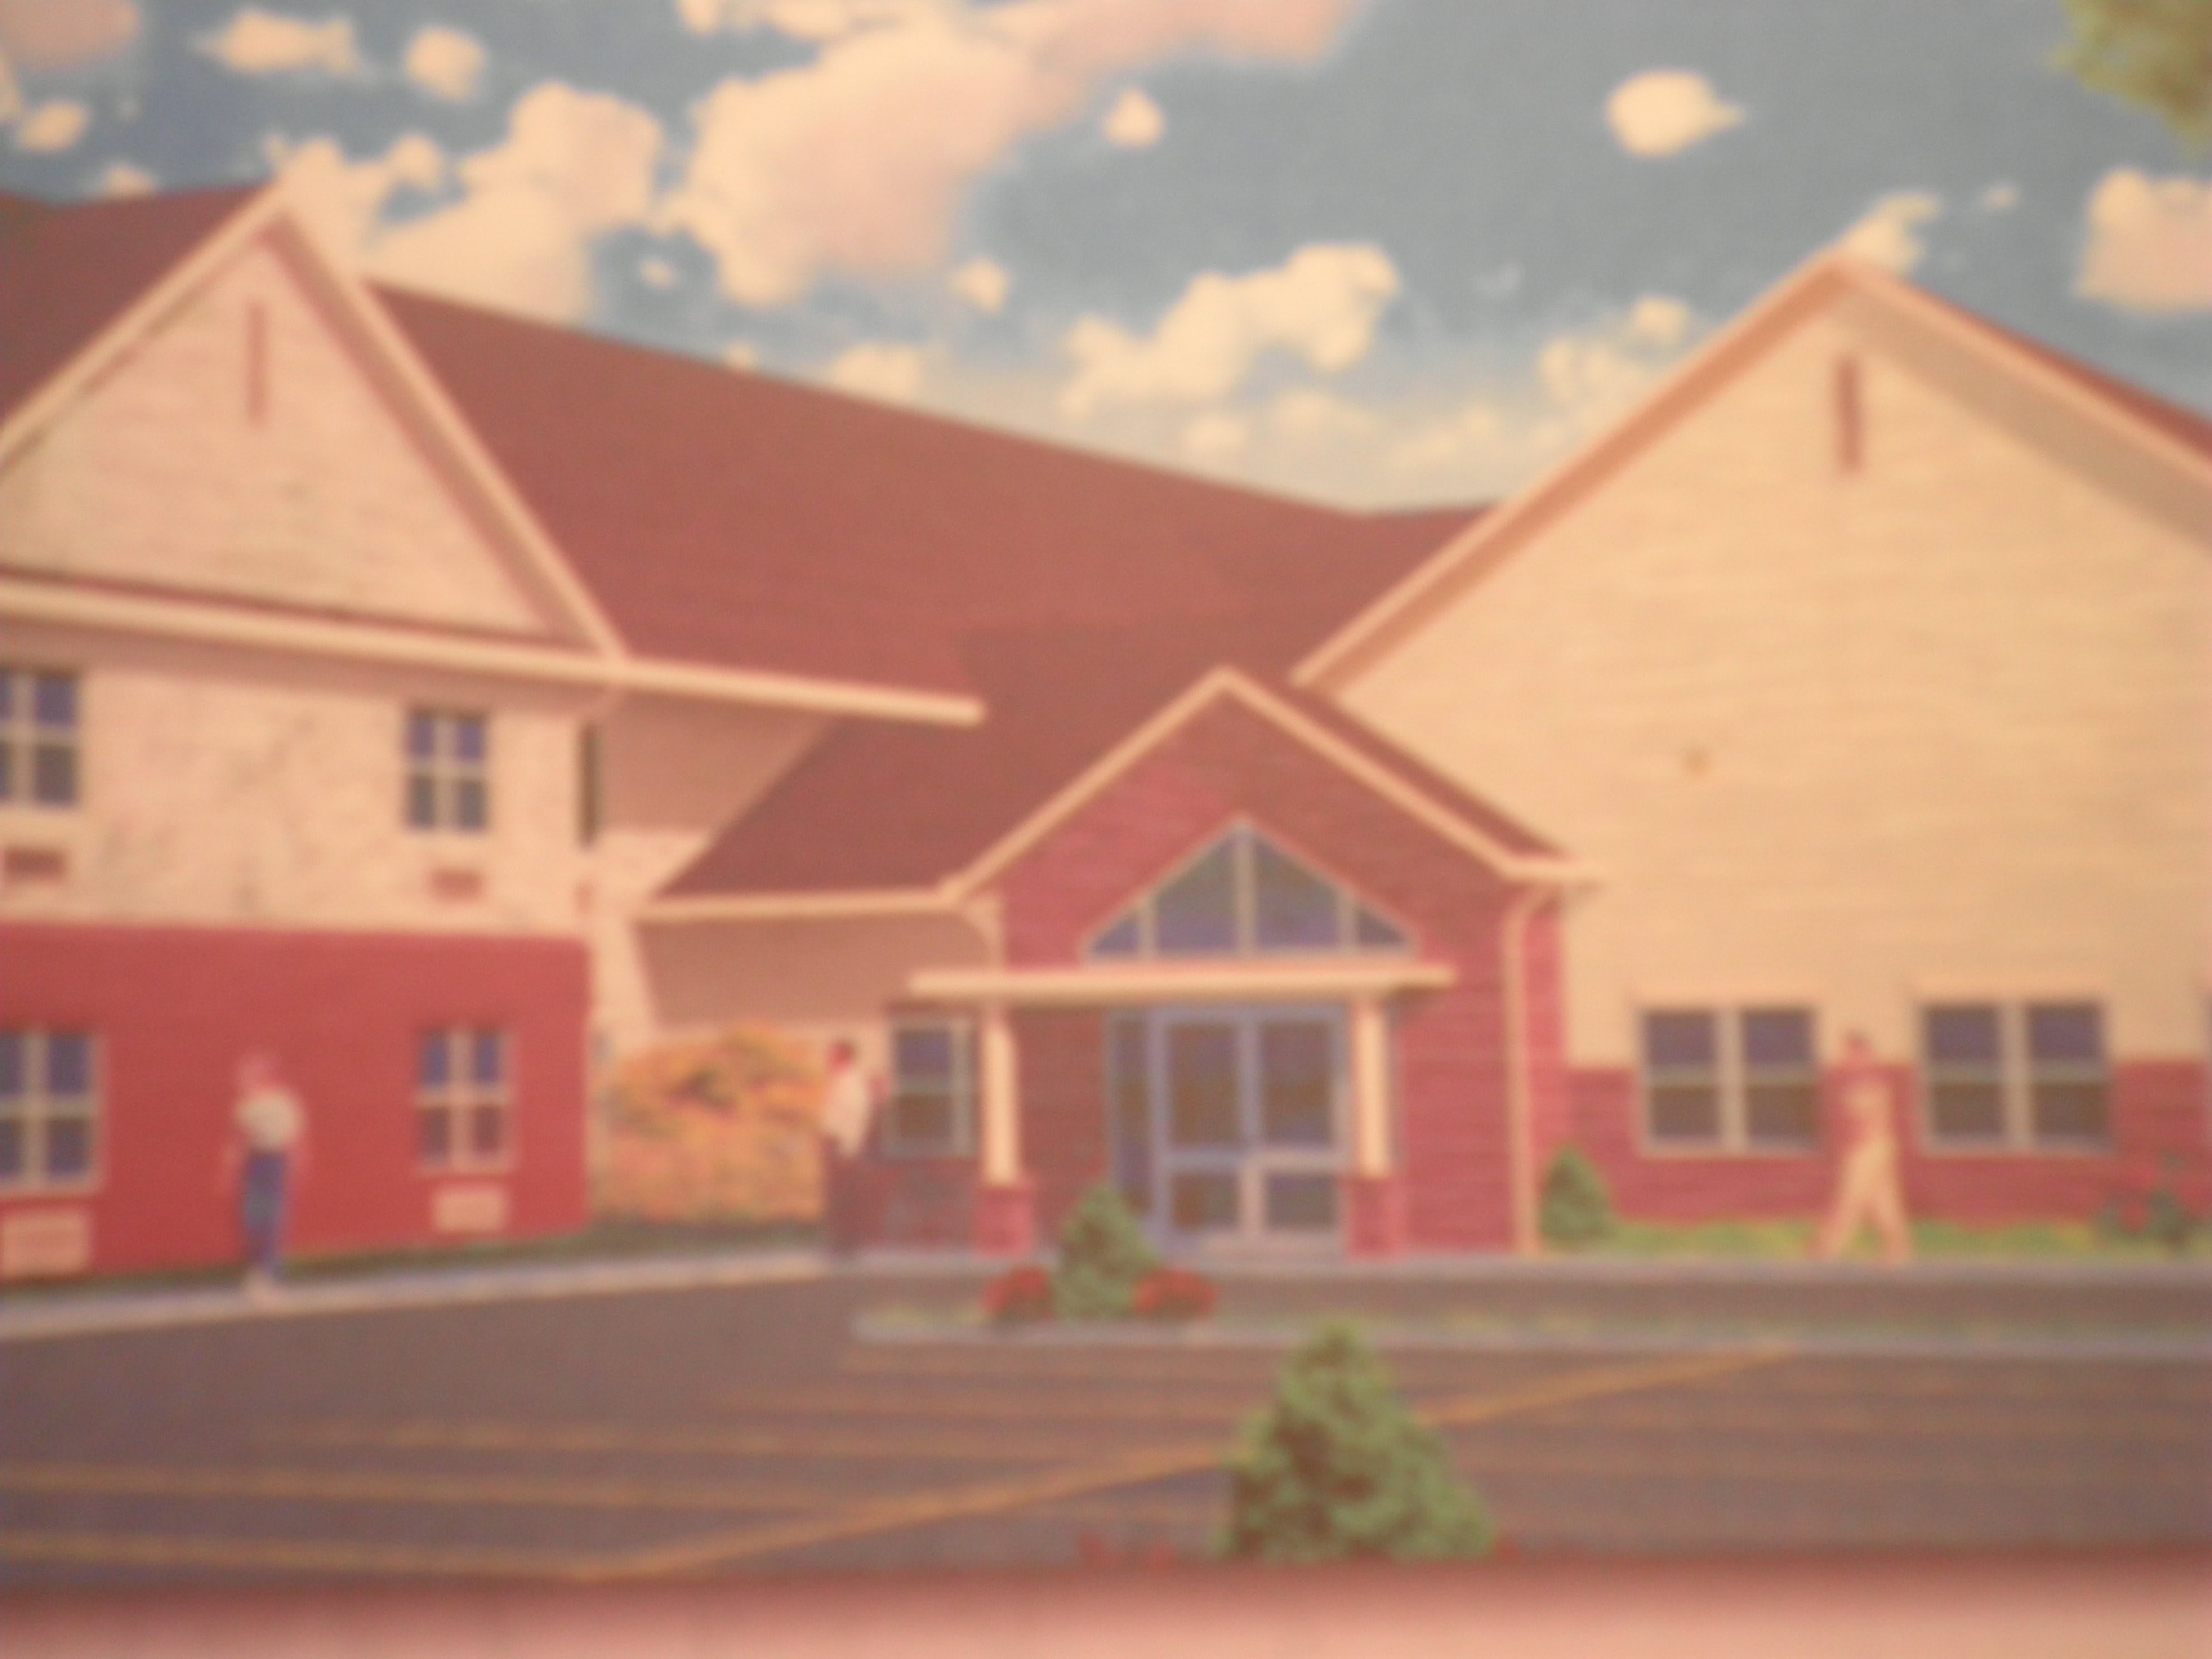 Community Commons Assisted Living | Warren, OH 44483 | 4 reviews